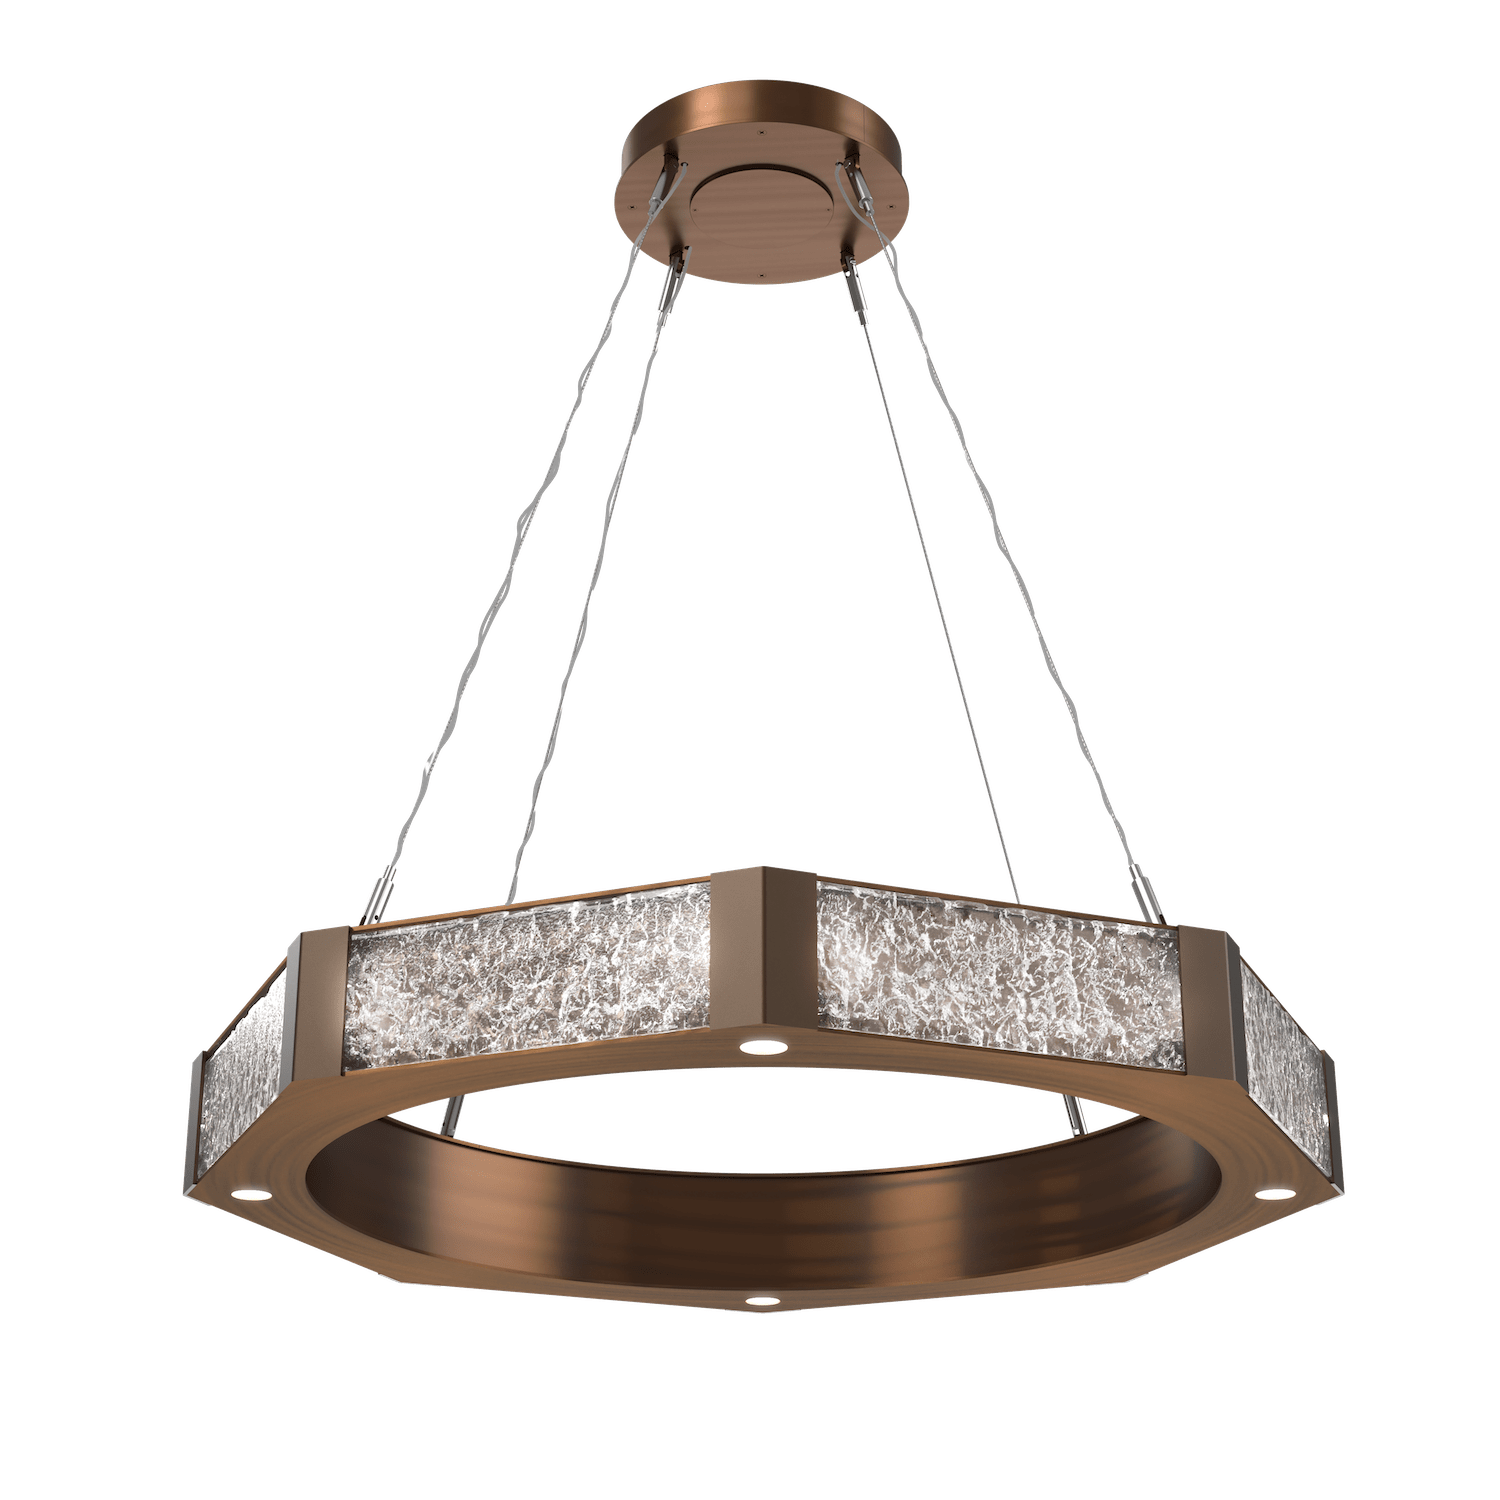 CHB0061-36-RB-GC-Hammerton-Studio-Glacier-36-inch-ring-chandelier-with-oil-rubbed-bronze-finish-and-clear-blown-glass-with-geo-clear-cast-glass-diffusers-and-LED-lamping